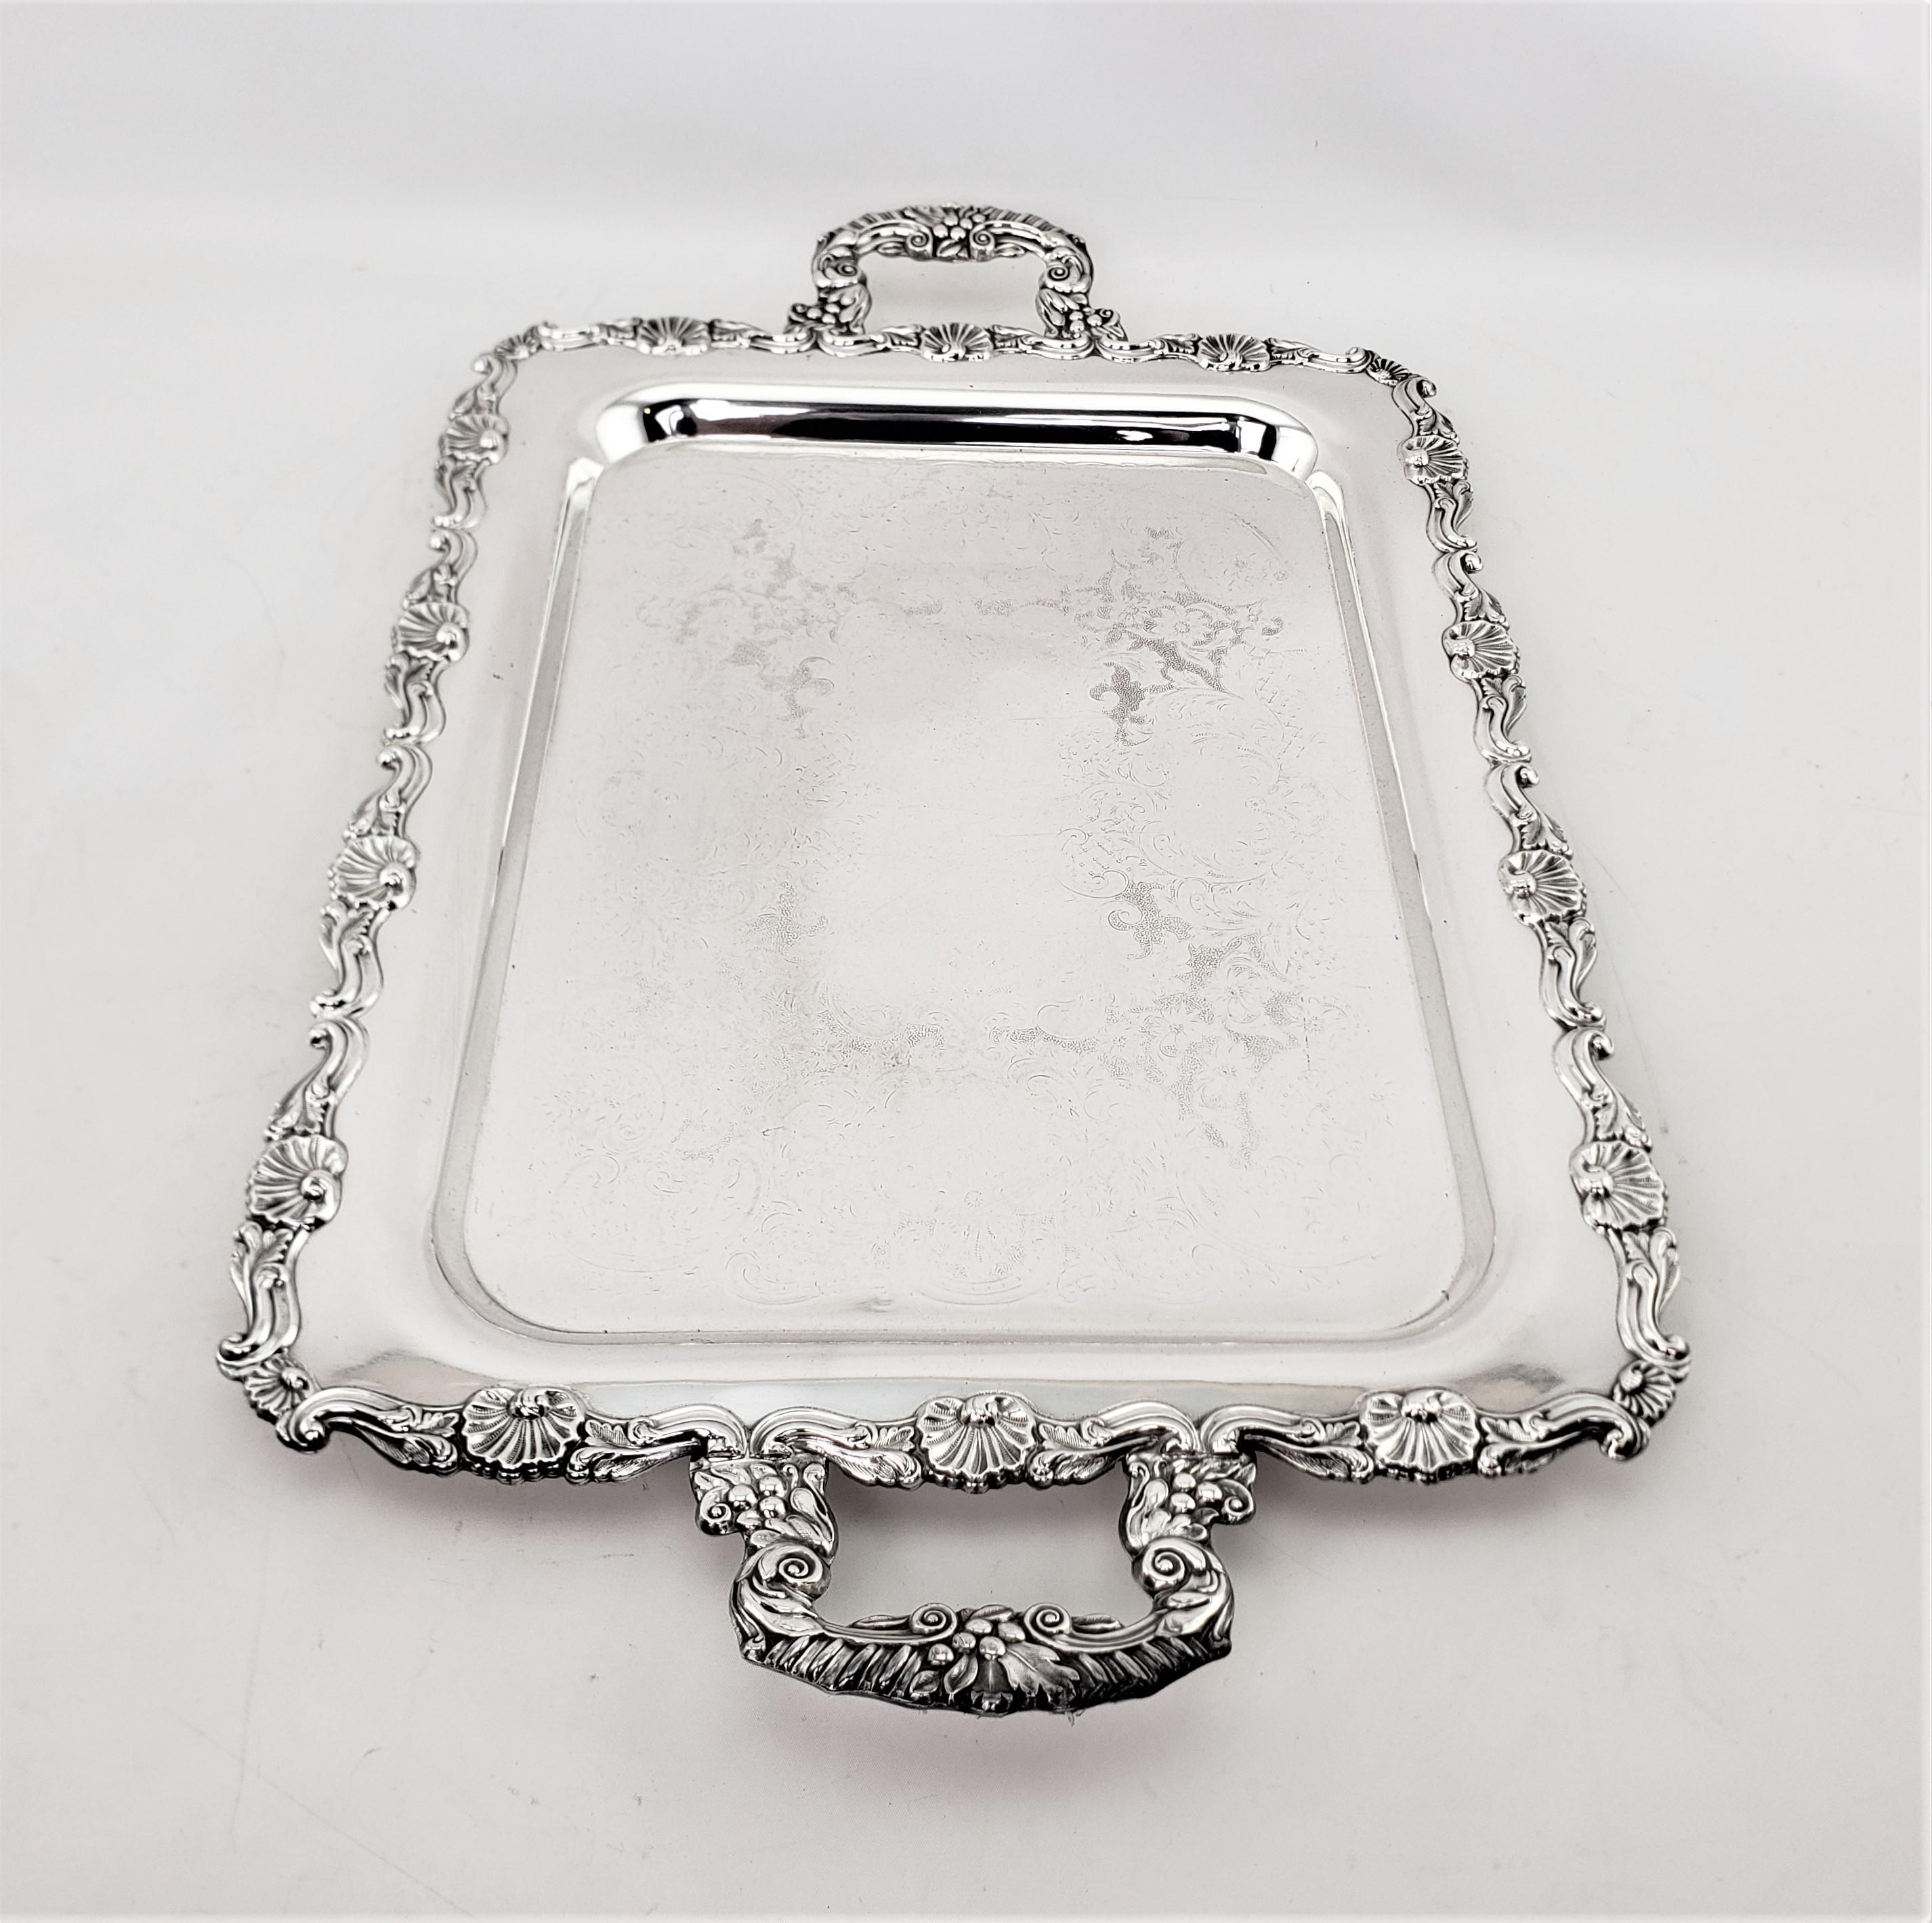 Machine-Made Antique Rectangular Silver Plated Serving Tray with Stylized Floral Decoration For Sale